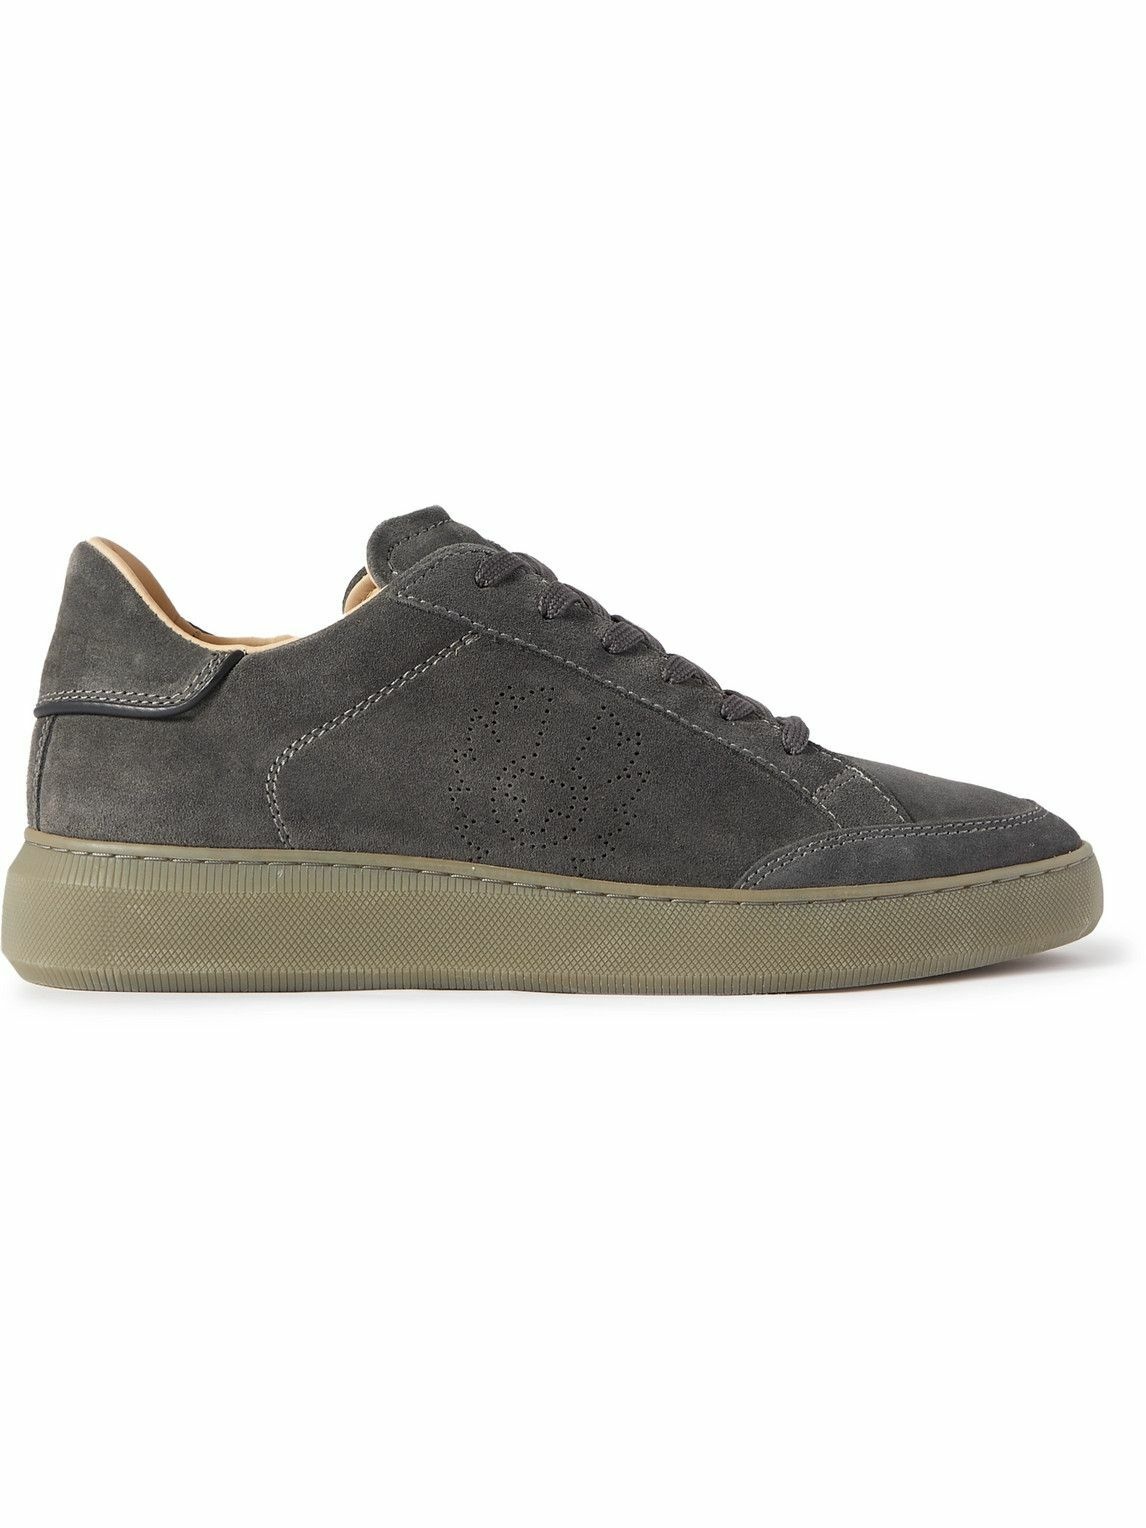 Photo: Belstaff - Track Logo-Perforated Suede Sneakers - Gray